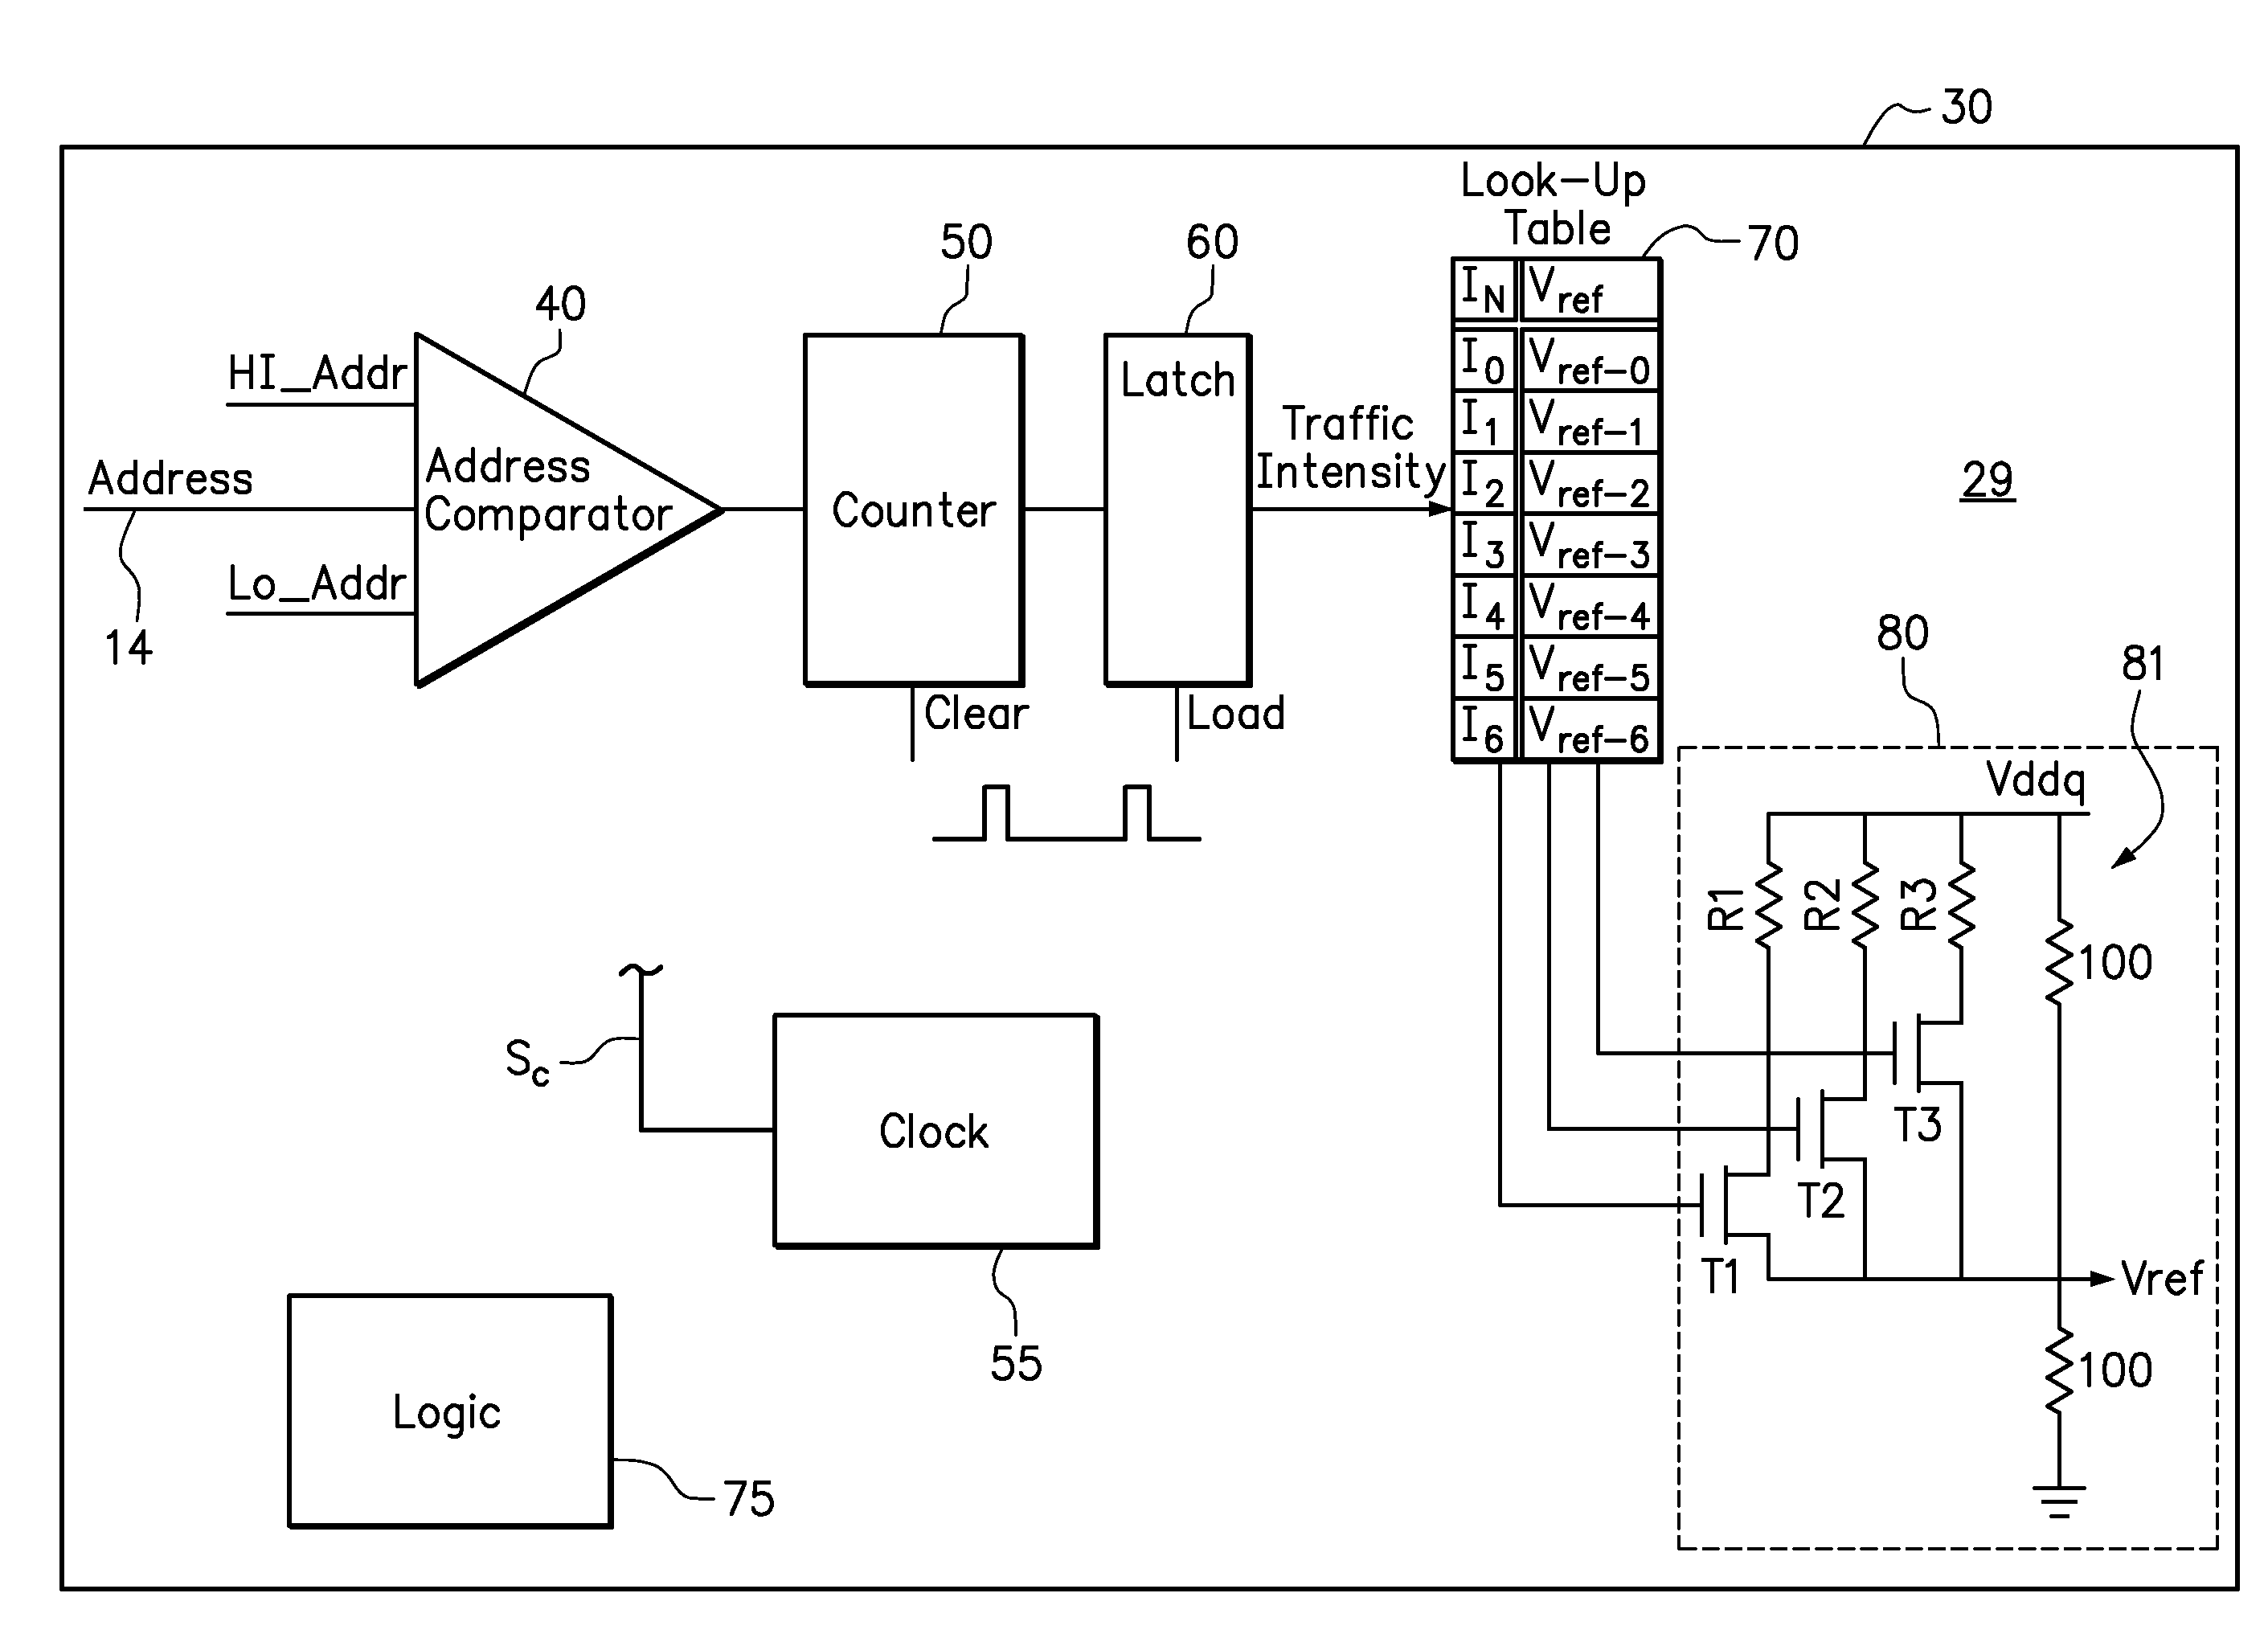 Dynamic adjustment of reference voltage in a computer memory system